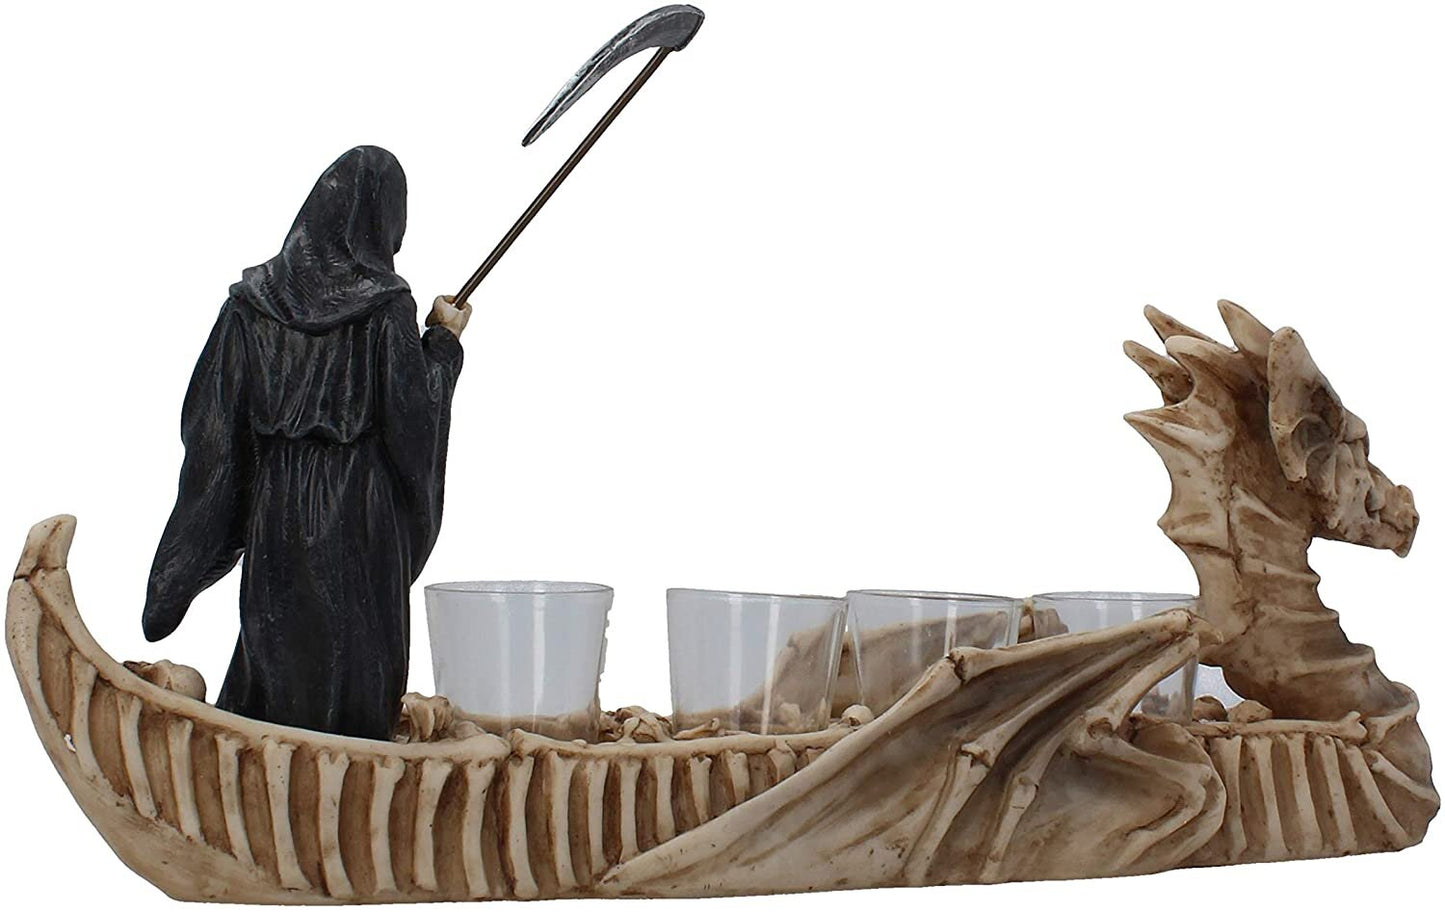 Gothic Shot Glass set with the Reaper